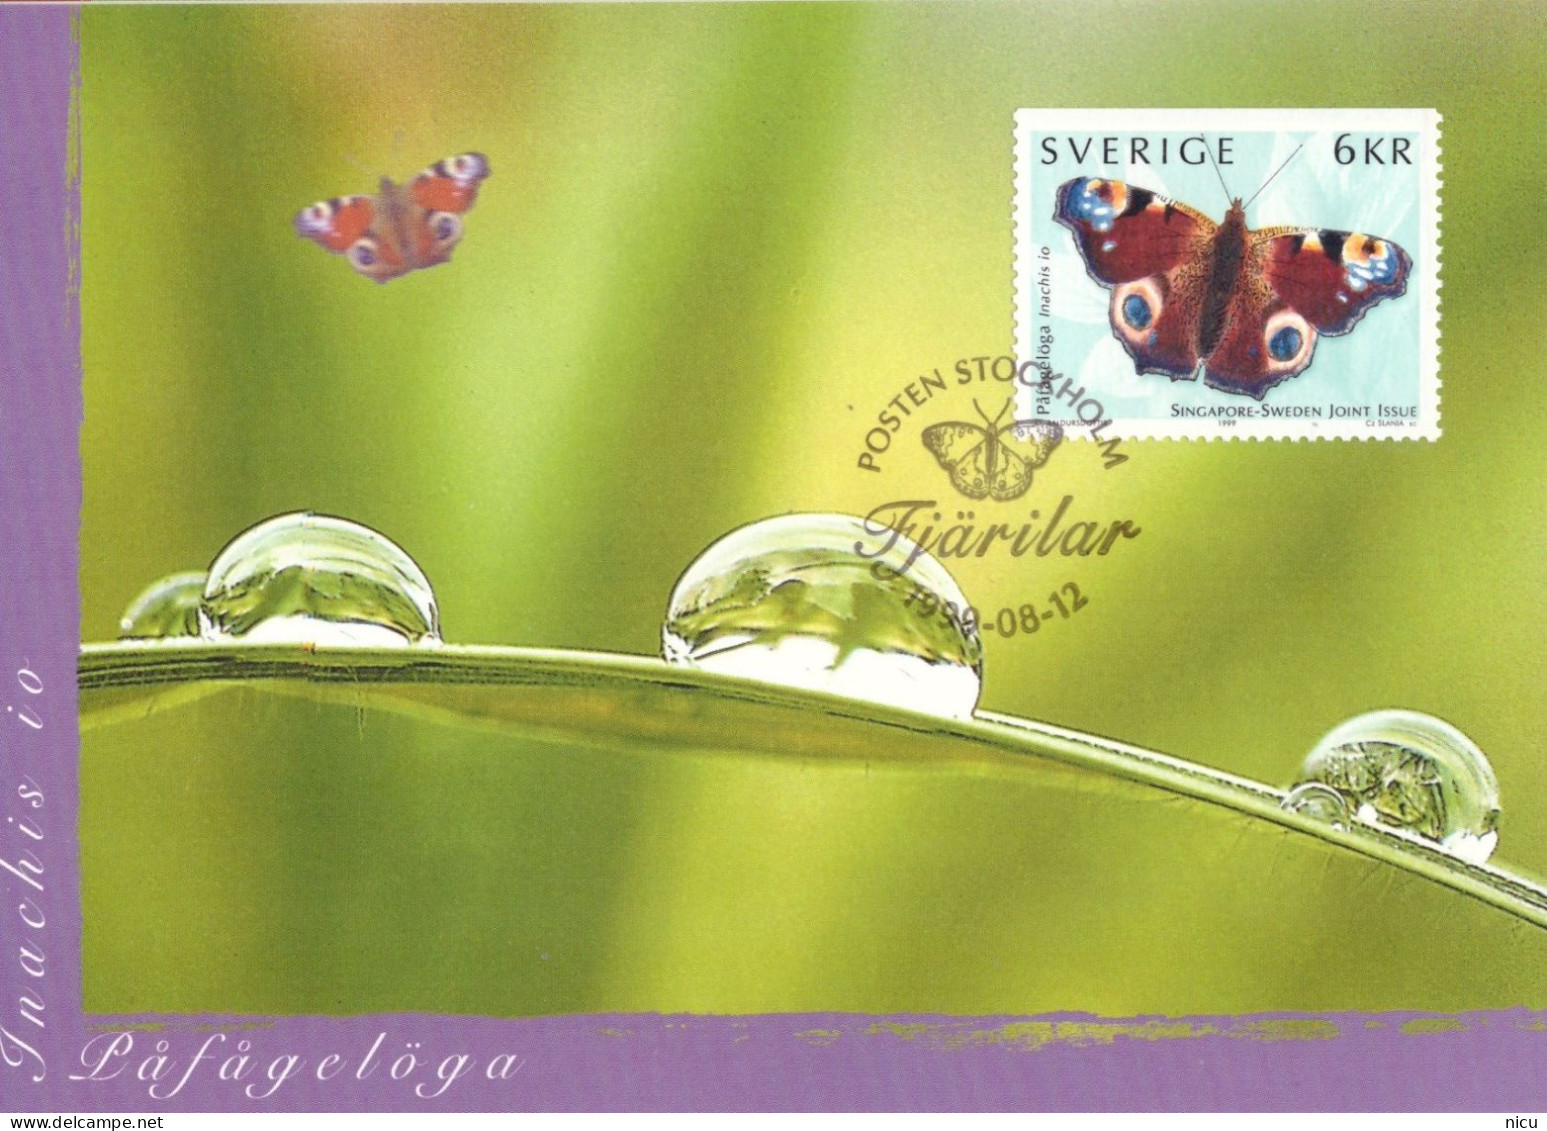 1999 - BUTTERFLIES - COMMON ISSUE SINGAPORE - SWEDEN - Maximum Cards & Covers